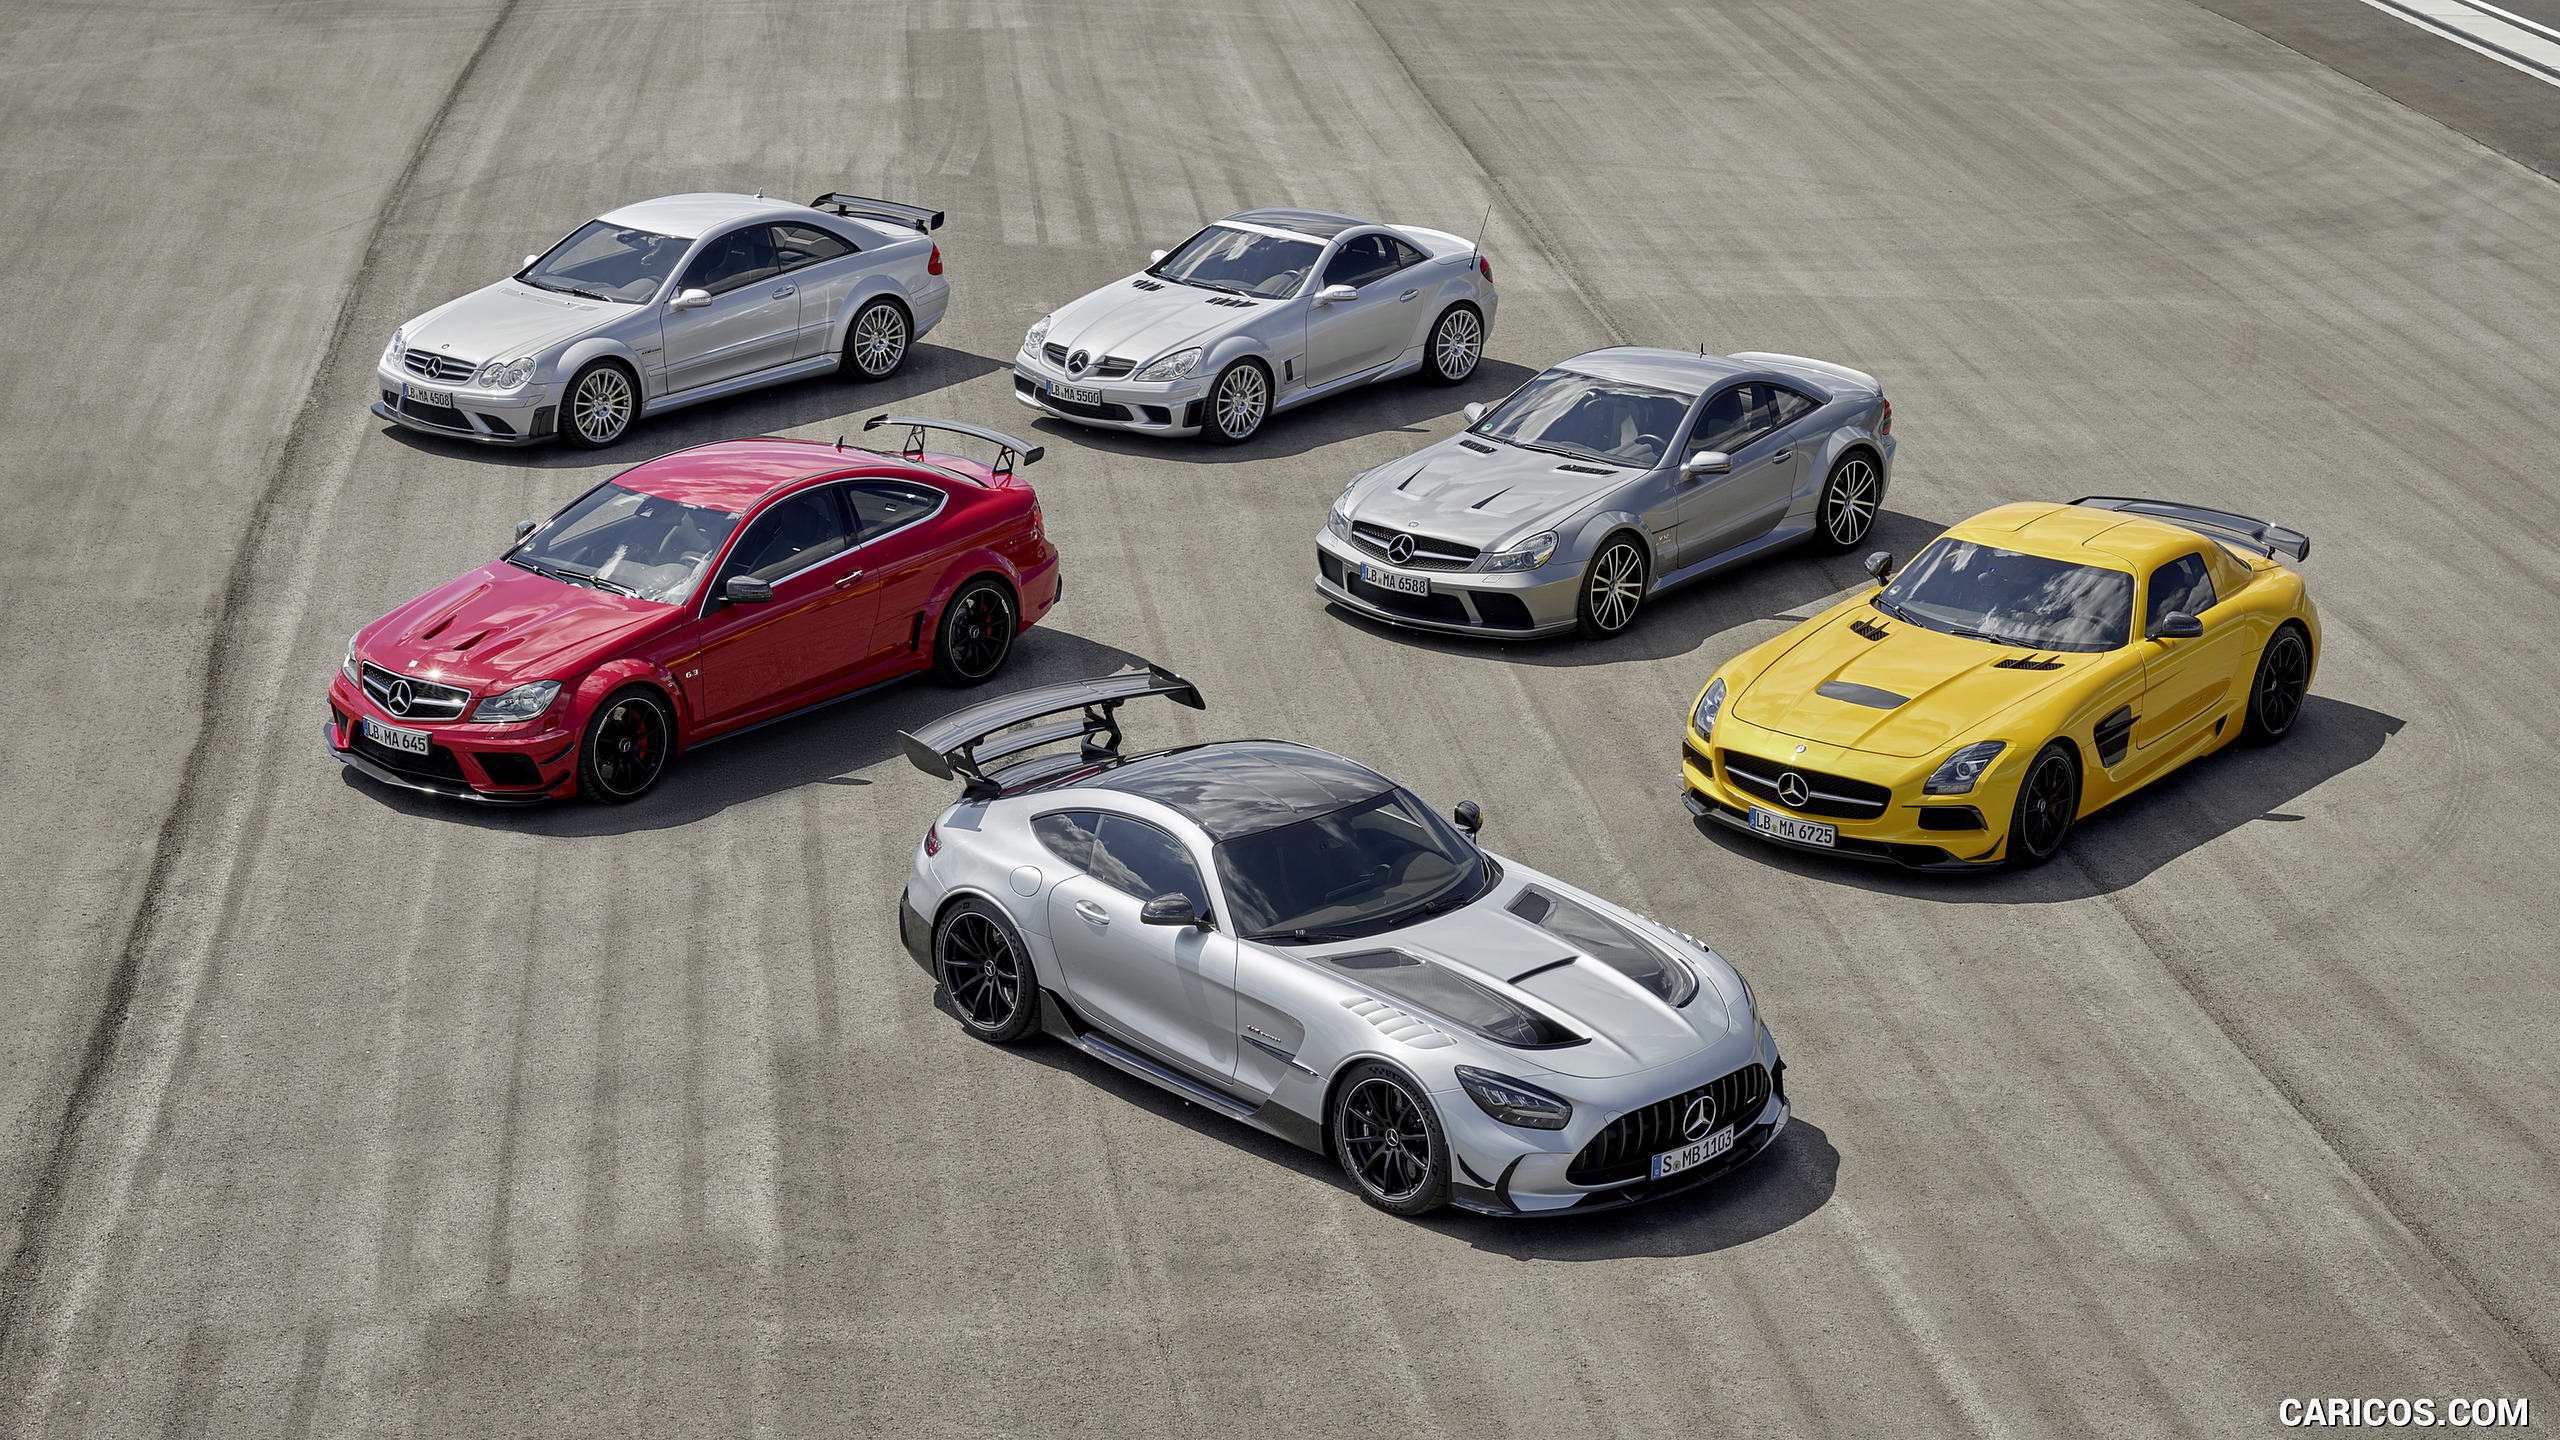 2021 Mercedes-AMG GT Black Series and Previous AMG Black Series Models, #105 of 215